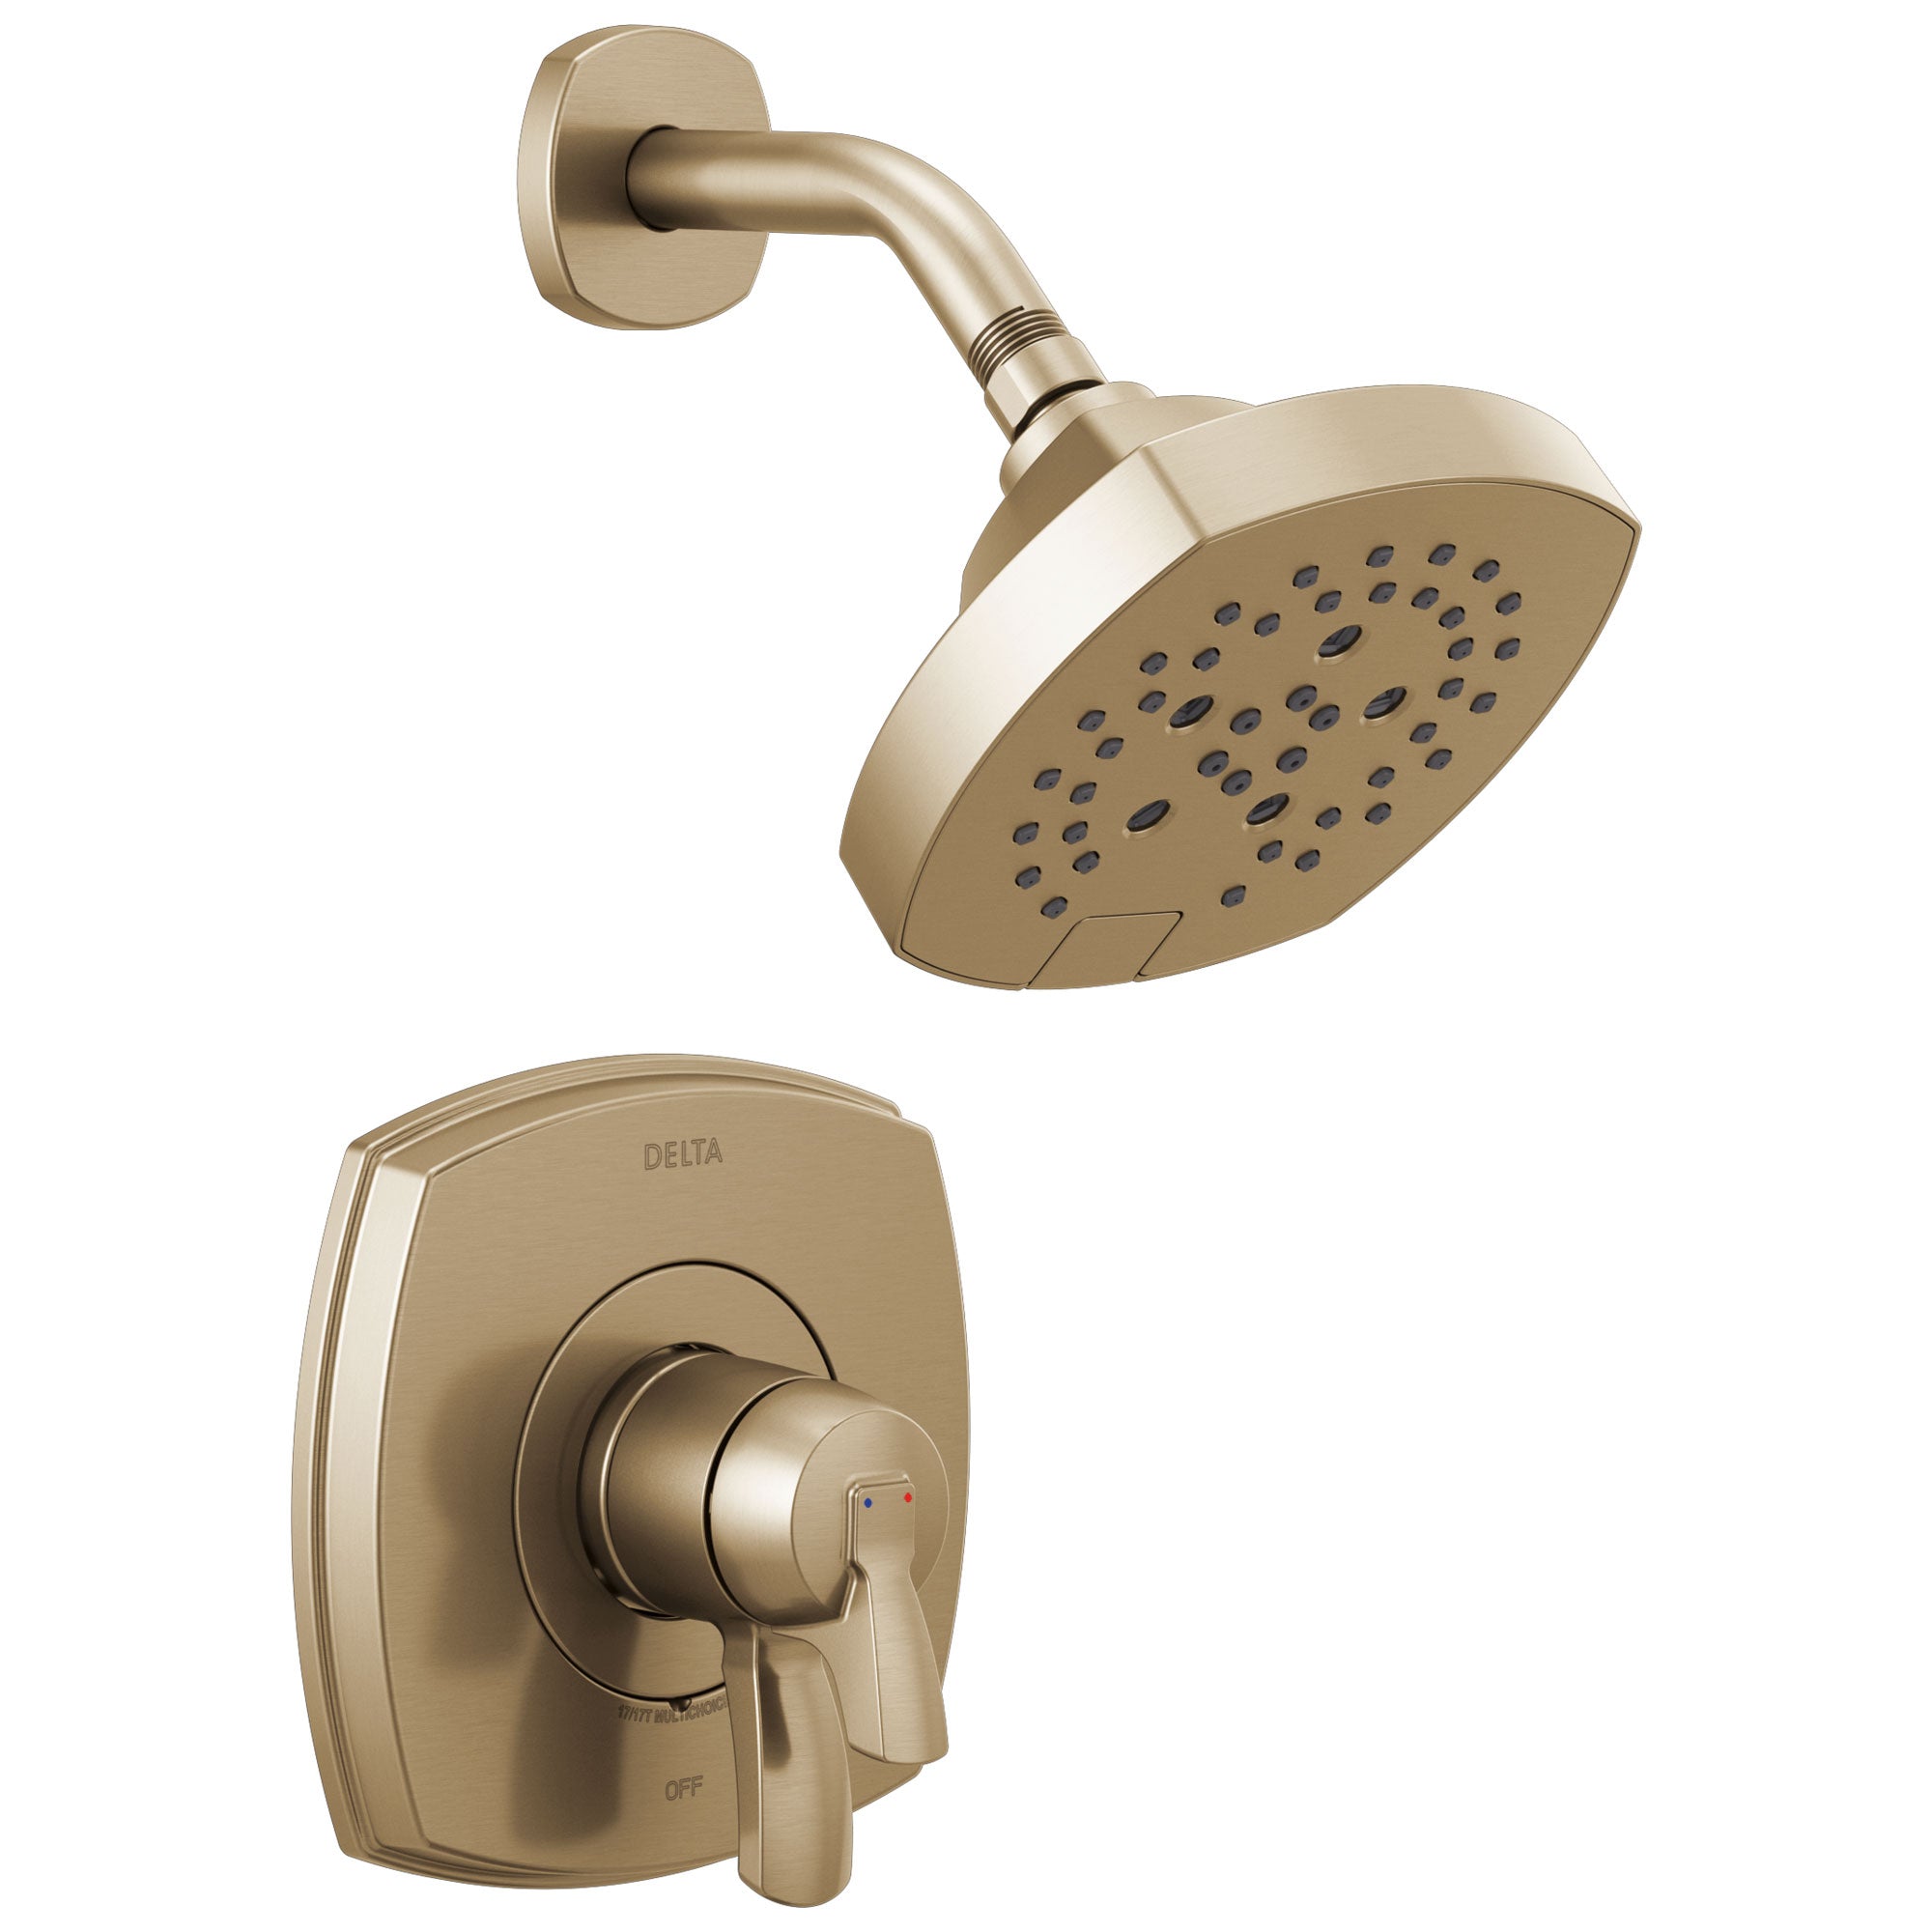 Delta Stryke Champagne Bronze Finish Monitor 17 Series Shower Only Faucet Includes Handles, Cartridge, and Valve with Stops D3366V